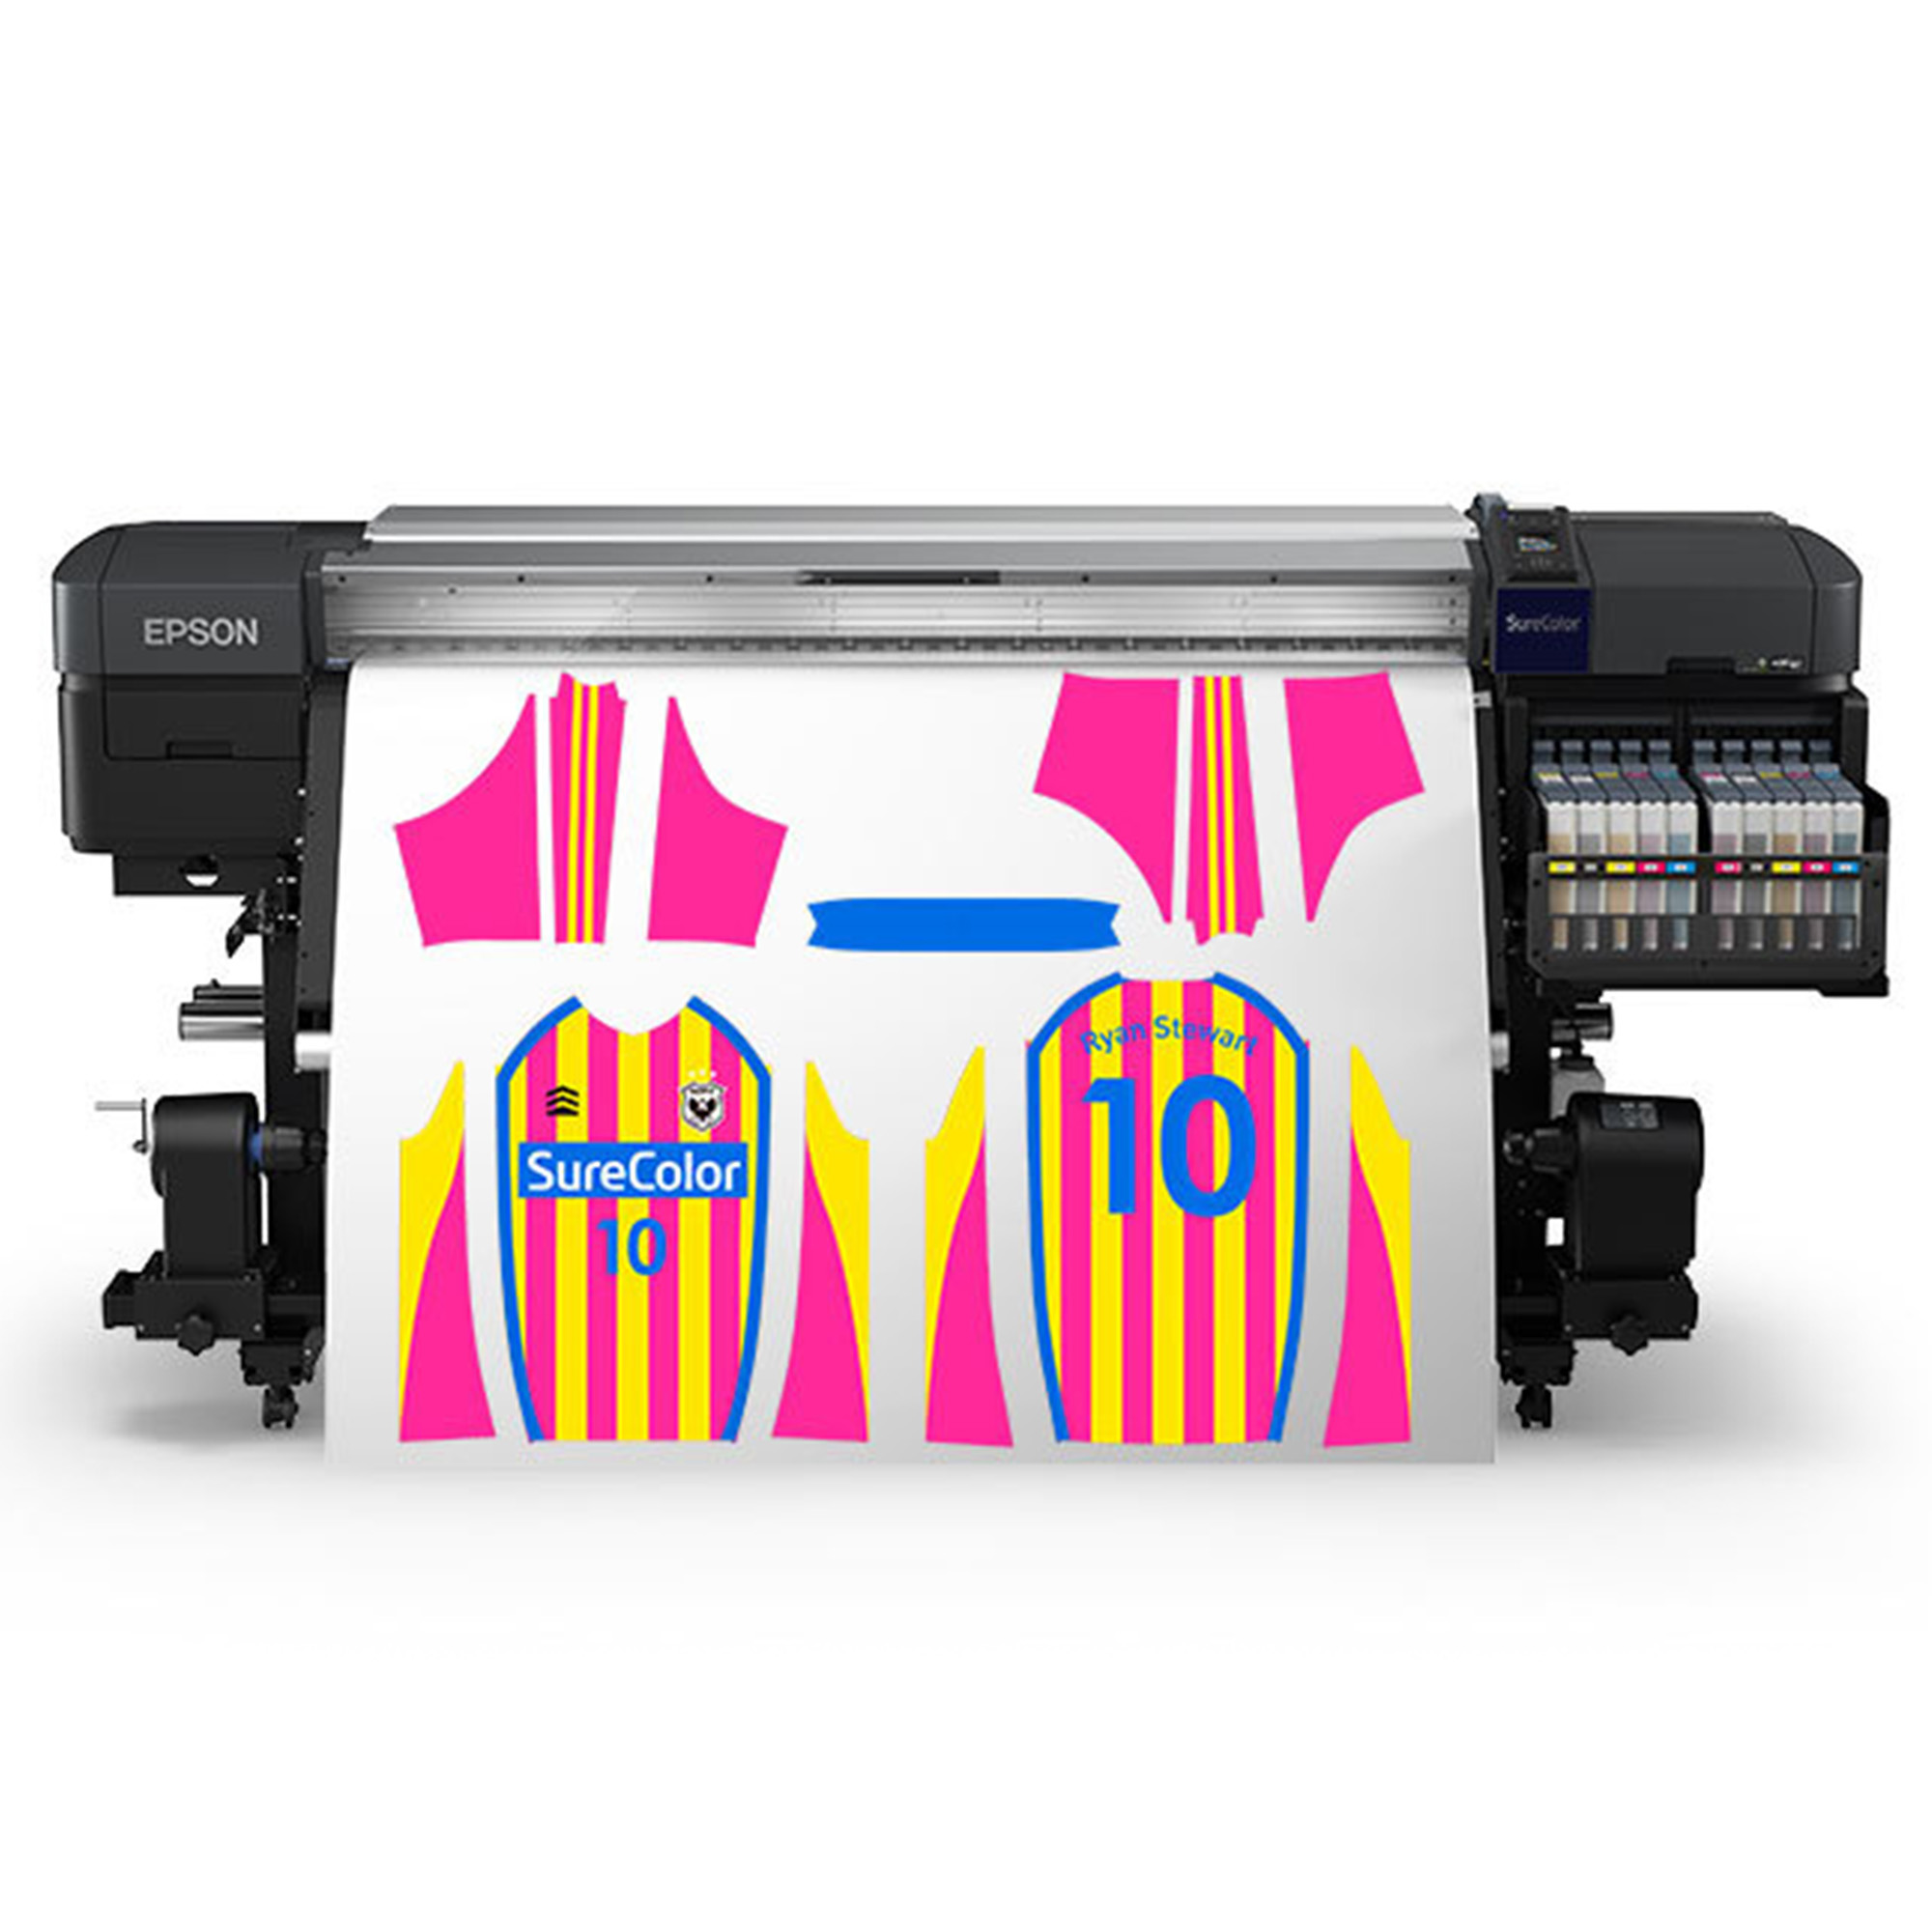 Epson® SureColor F9470 64" Production Edition Sublimation Printer - High Visibility - with Stand